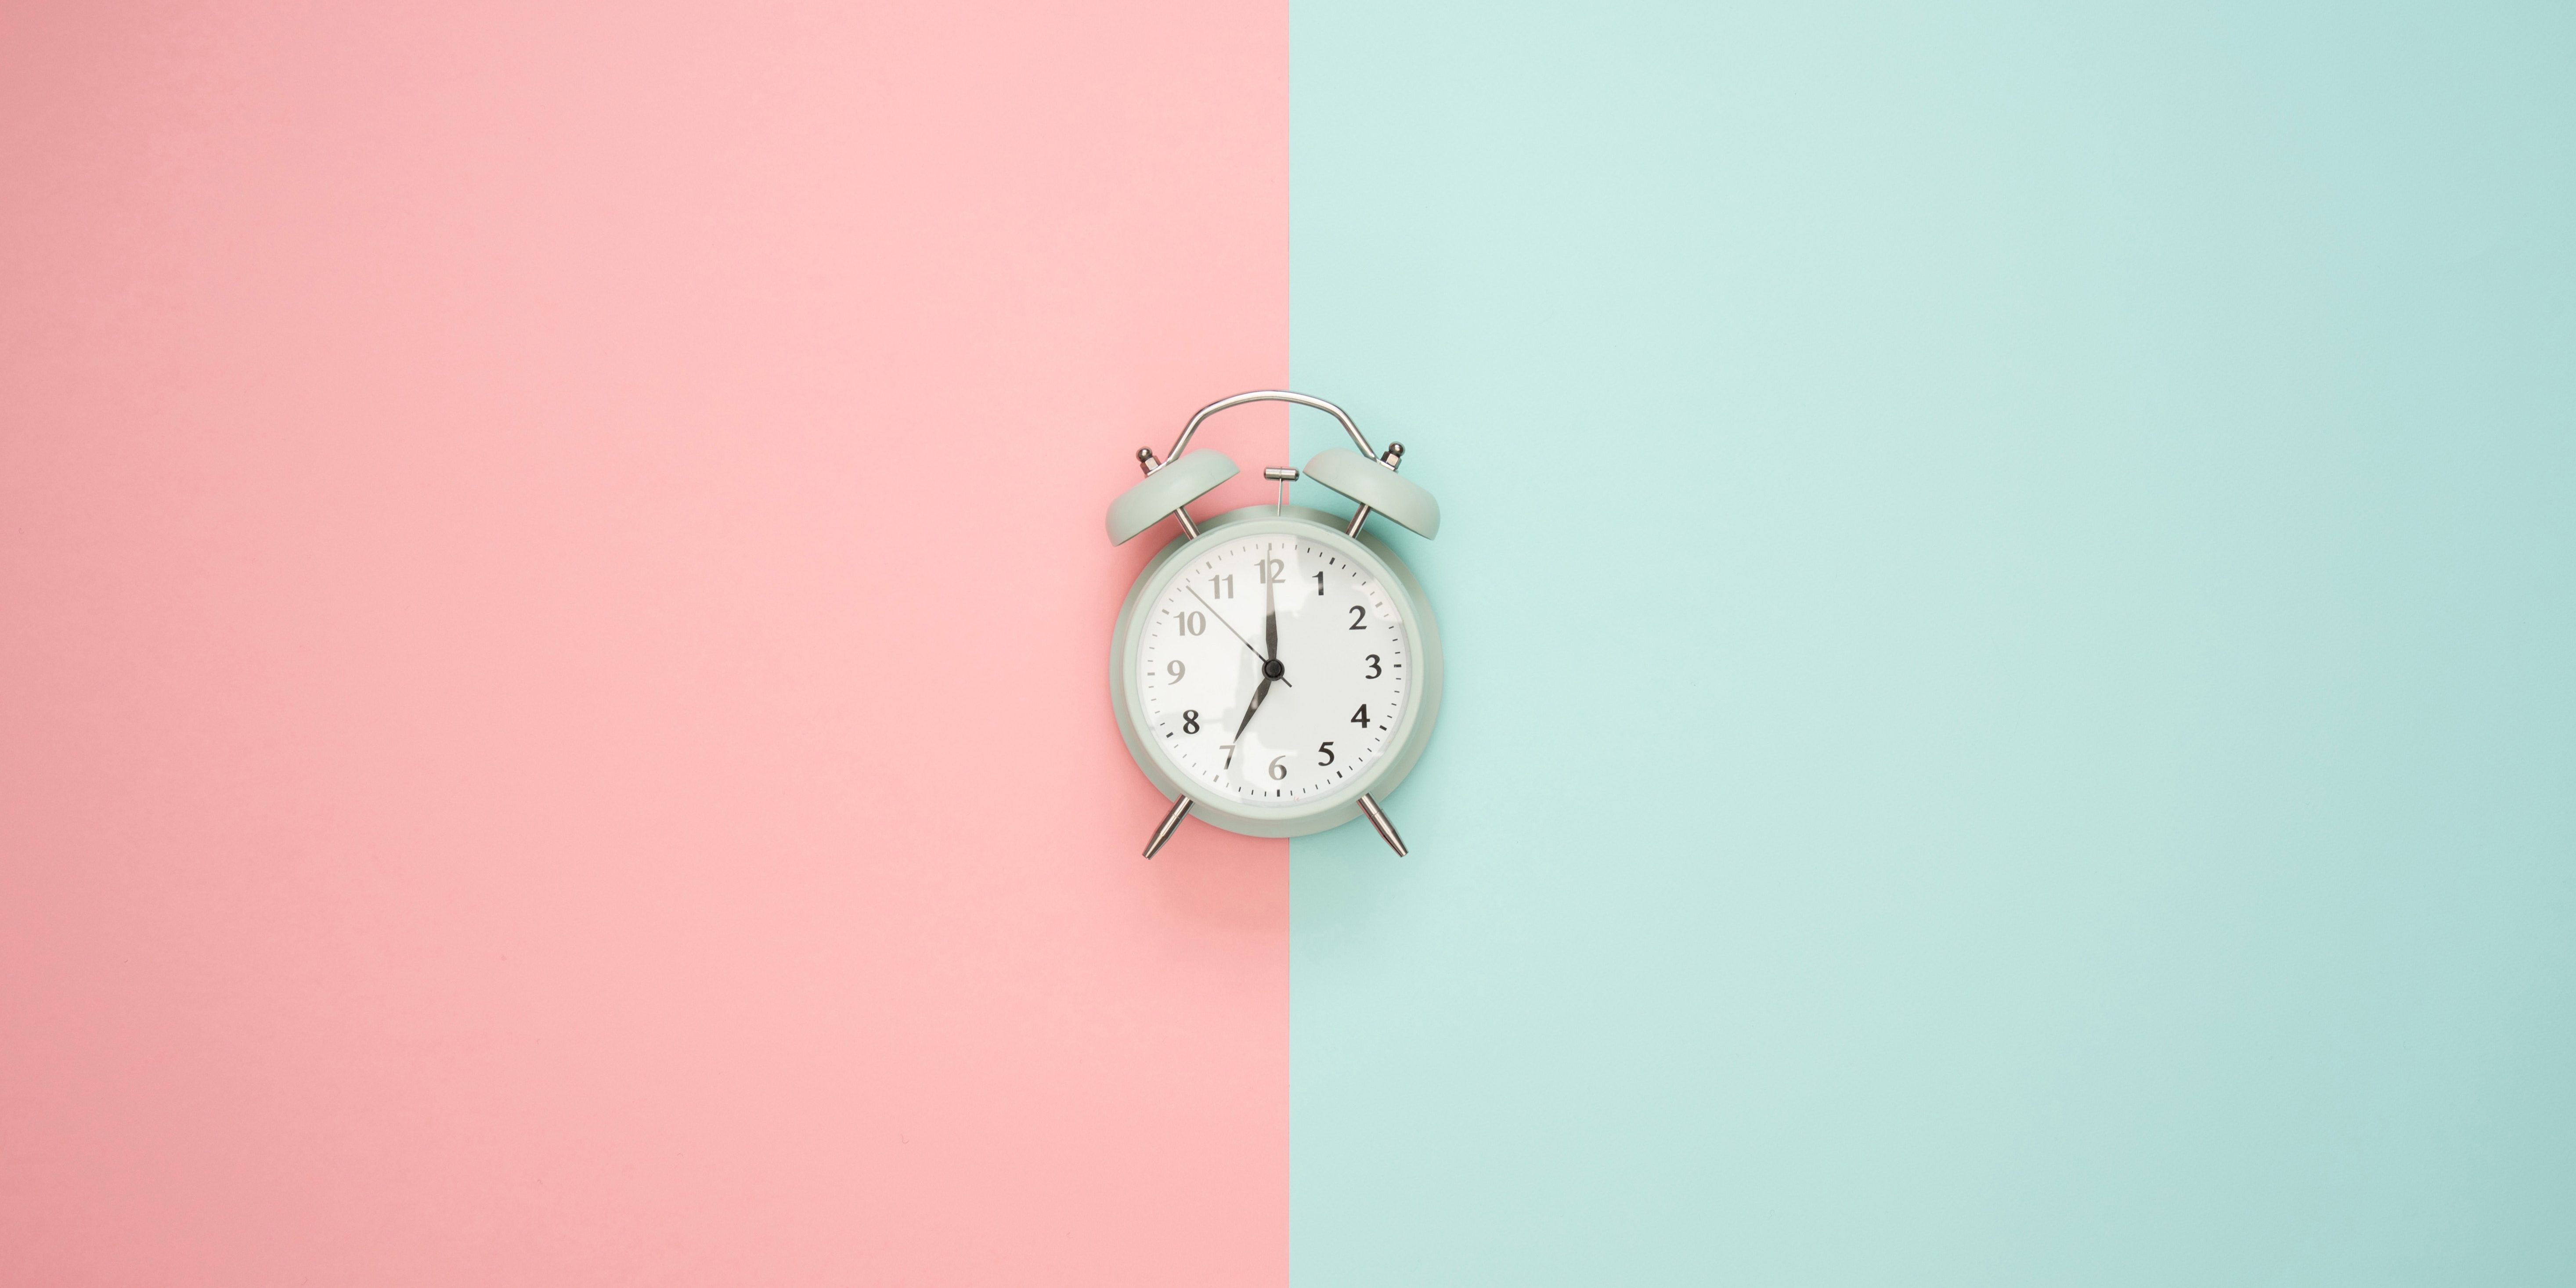 Alarm clock on pink and mint green background